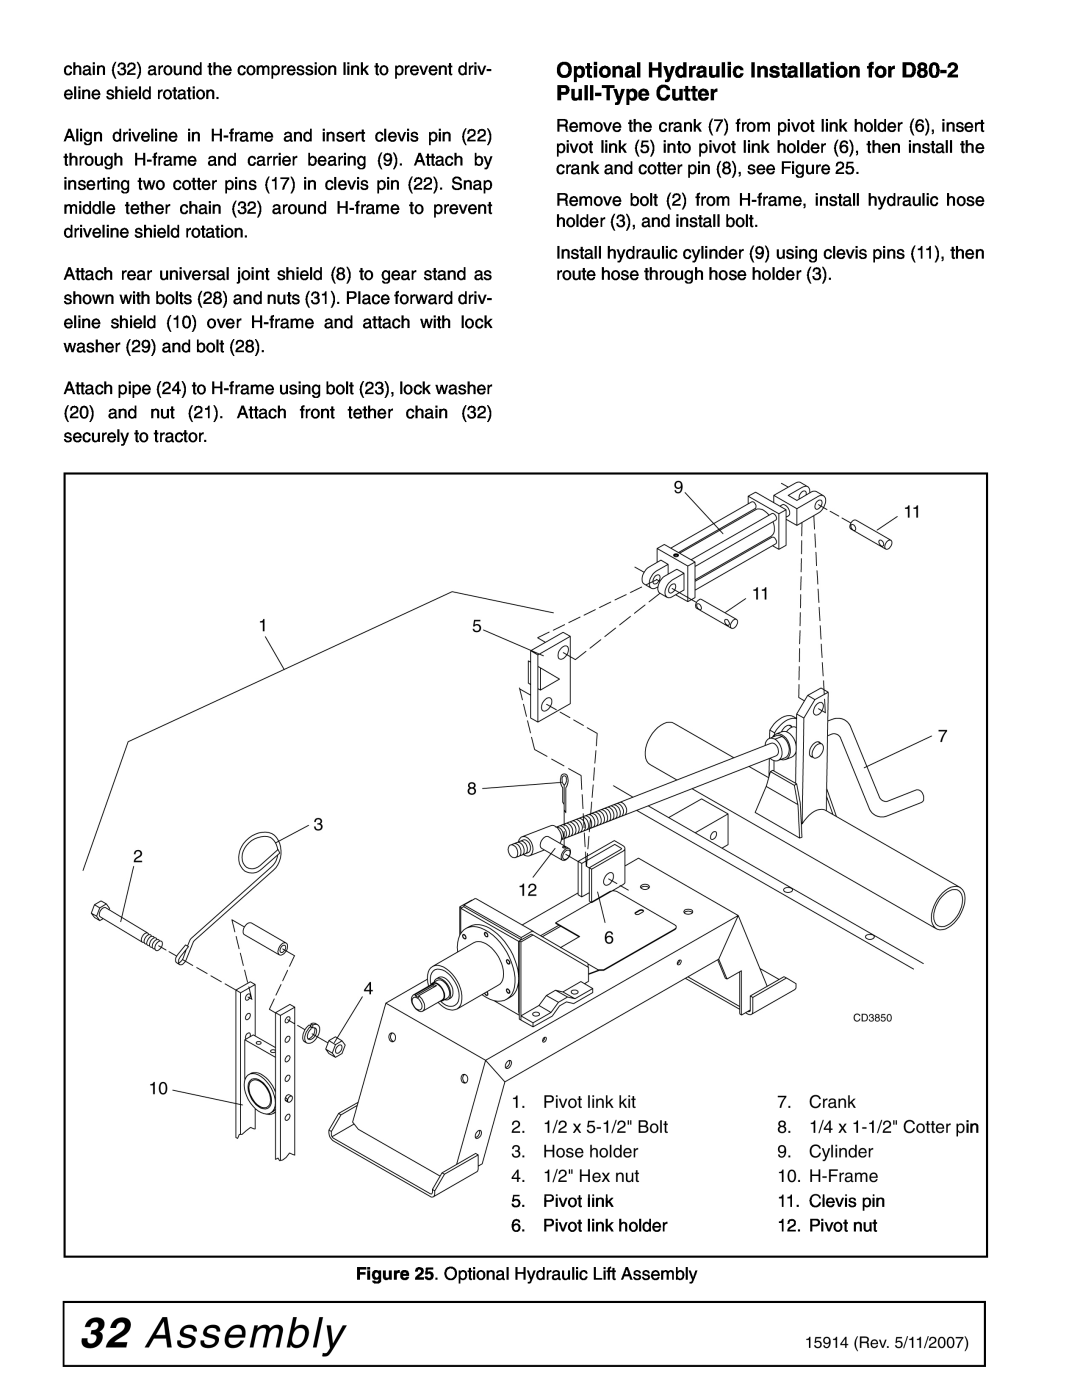 Woods Equipment MD80-2 manual Assembly 